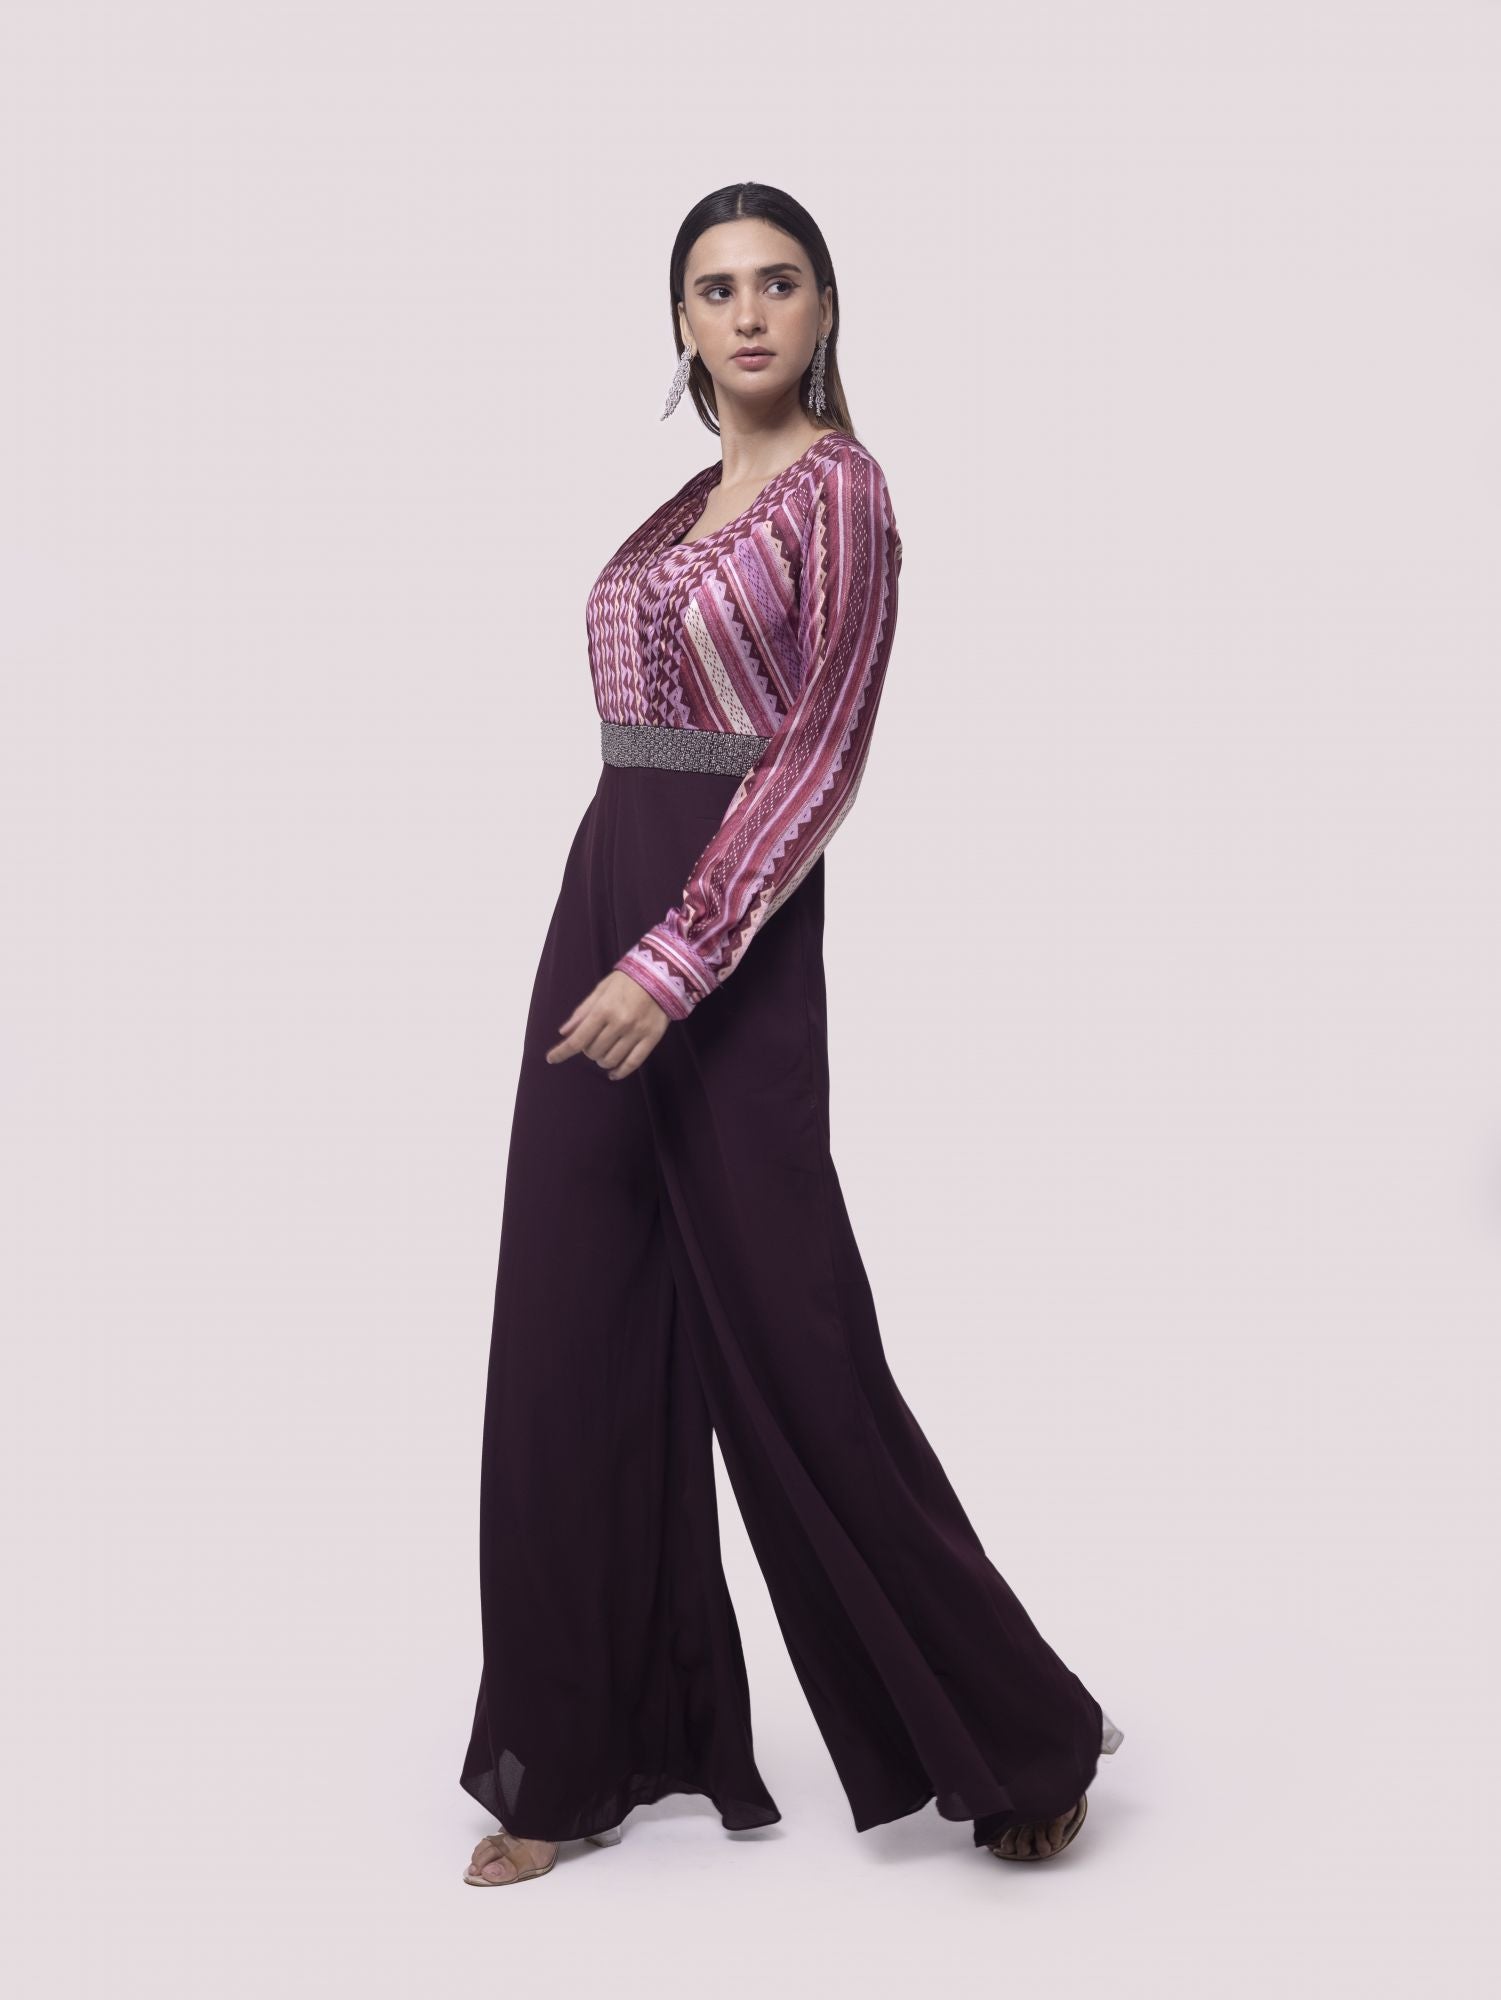 Buy wine color satin print georgette Indowestern dress online in USA. Shop the best and latest designs in embroidered sarees, designer sarees, Anarkali suit, lehengas, sharara suits for weddings and special occasions from Pure Elegance Indian fashion store in USA.-dress